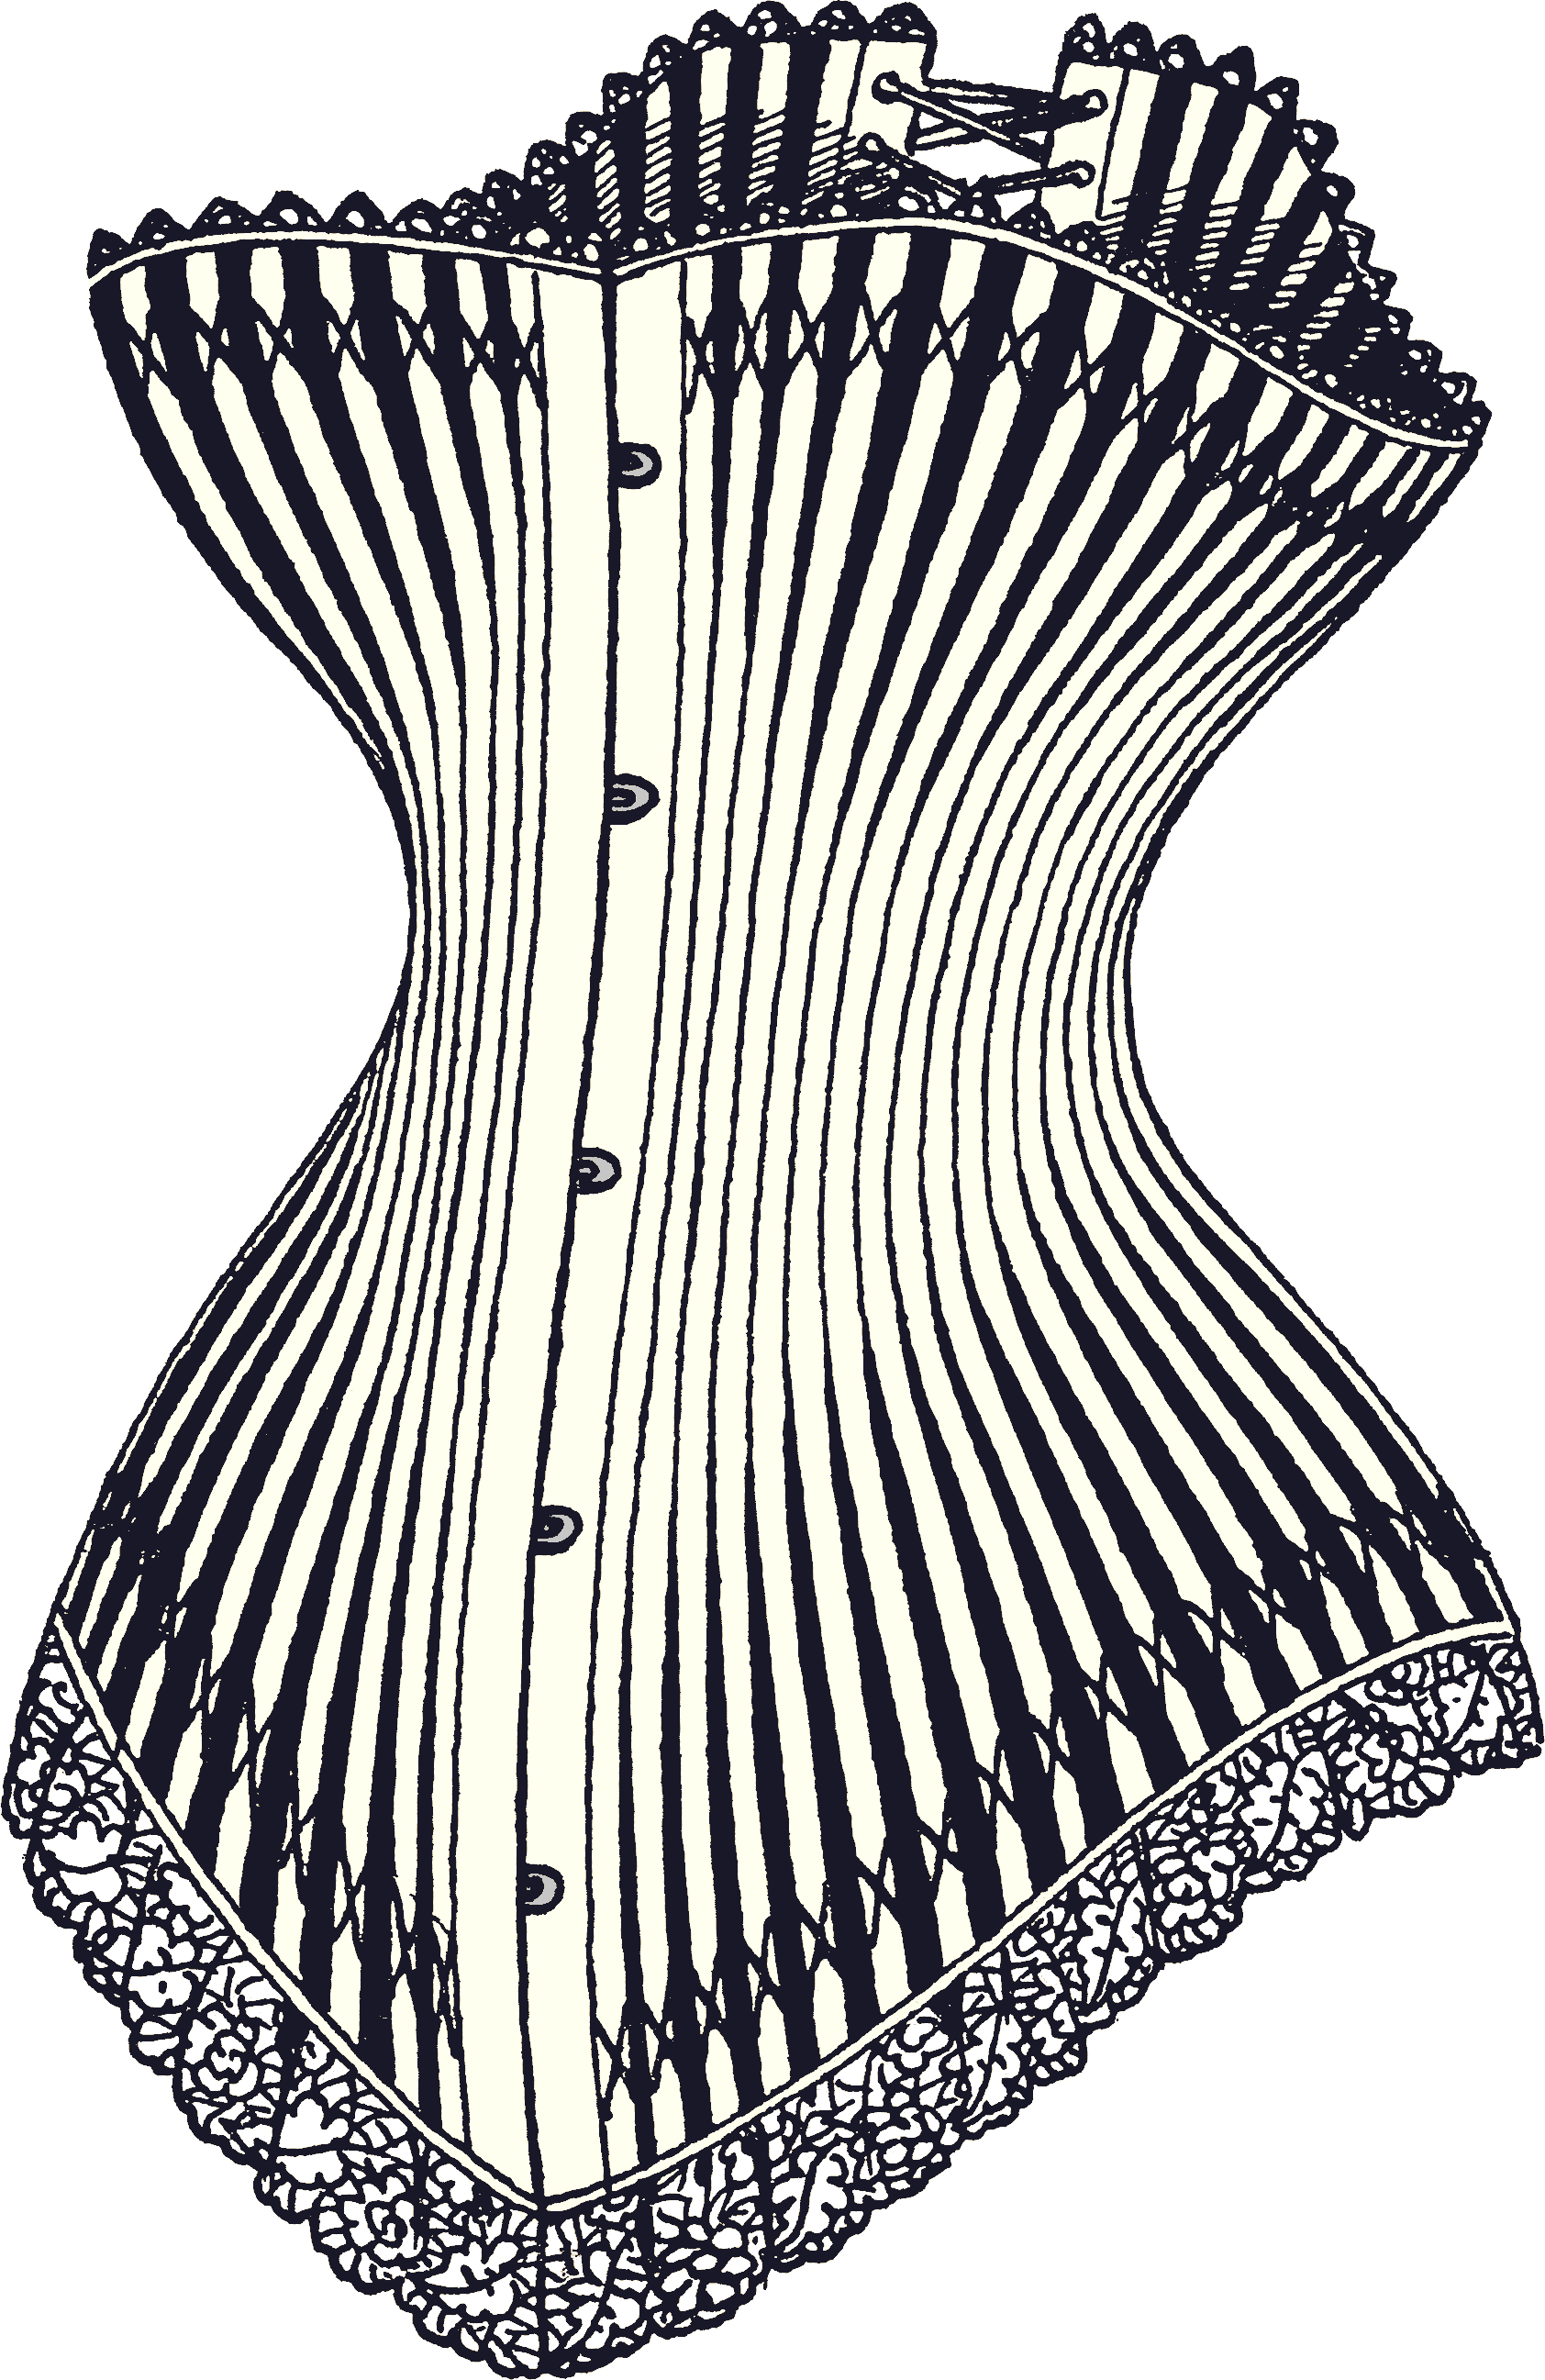 "Corset1878taille46 300gram" by Anonymous - second-hand source: Le Corset by Libron. 1933. Licensed under Public Domain via Wikimedia Commons - https://commons.wikimedia.org/wiki/File:Corset1878taille46_300gram.png#/media/File:Corset1878taille46_300gram.png